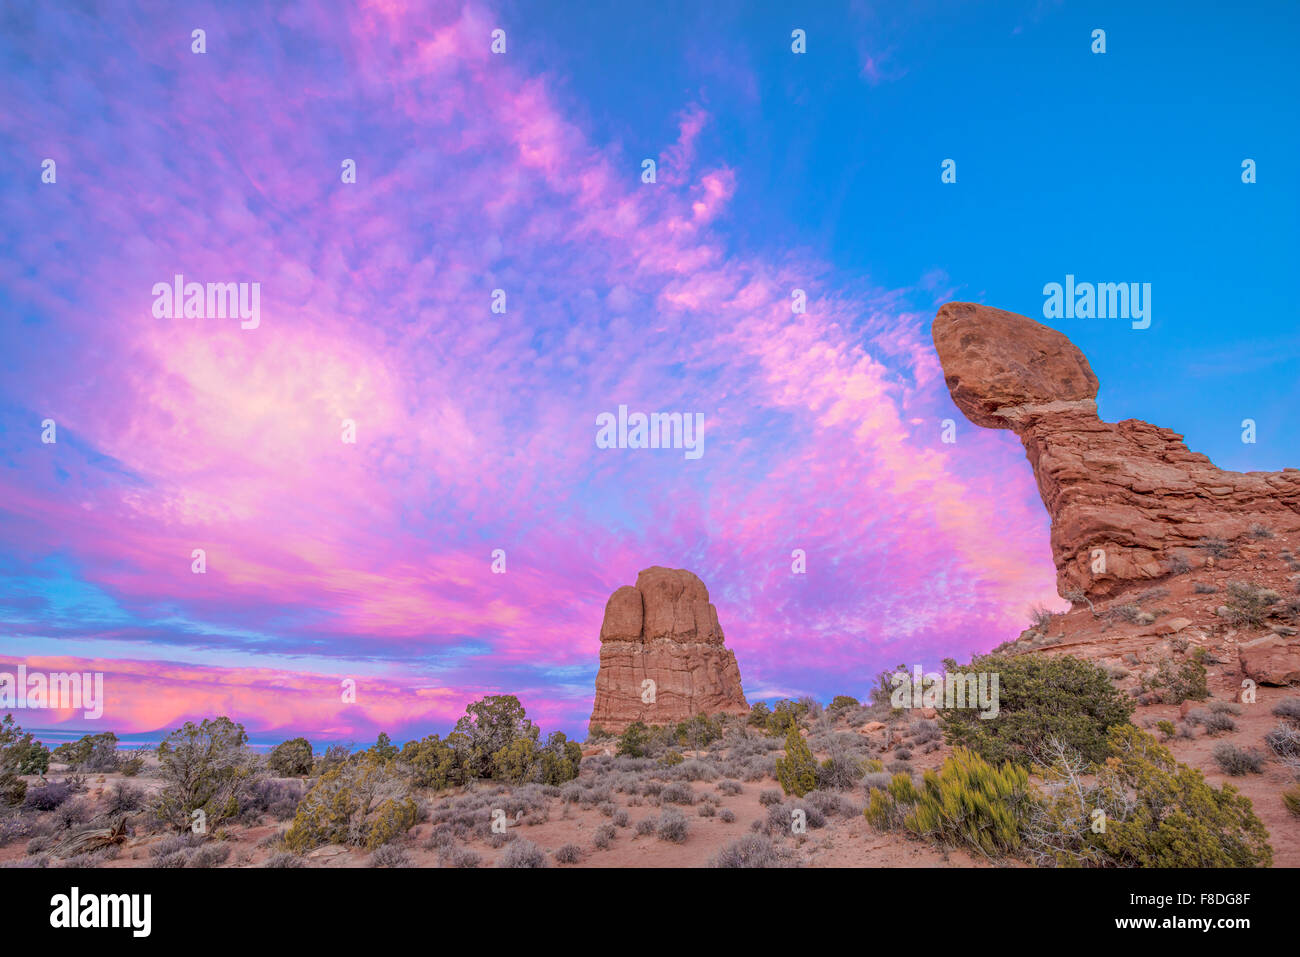 Balanced Rock and sunset clouds, Arches National Park, Utah Entrada sandstone clouds, Arches National Park, Utah Entrada sandsto Stock Photo